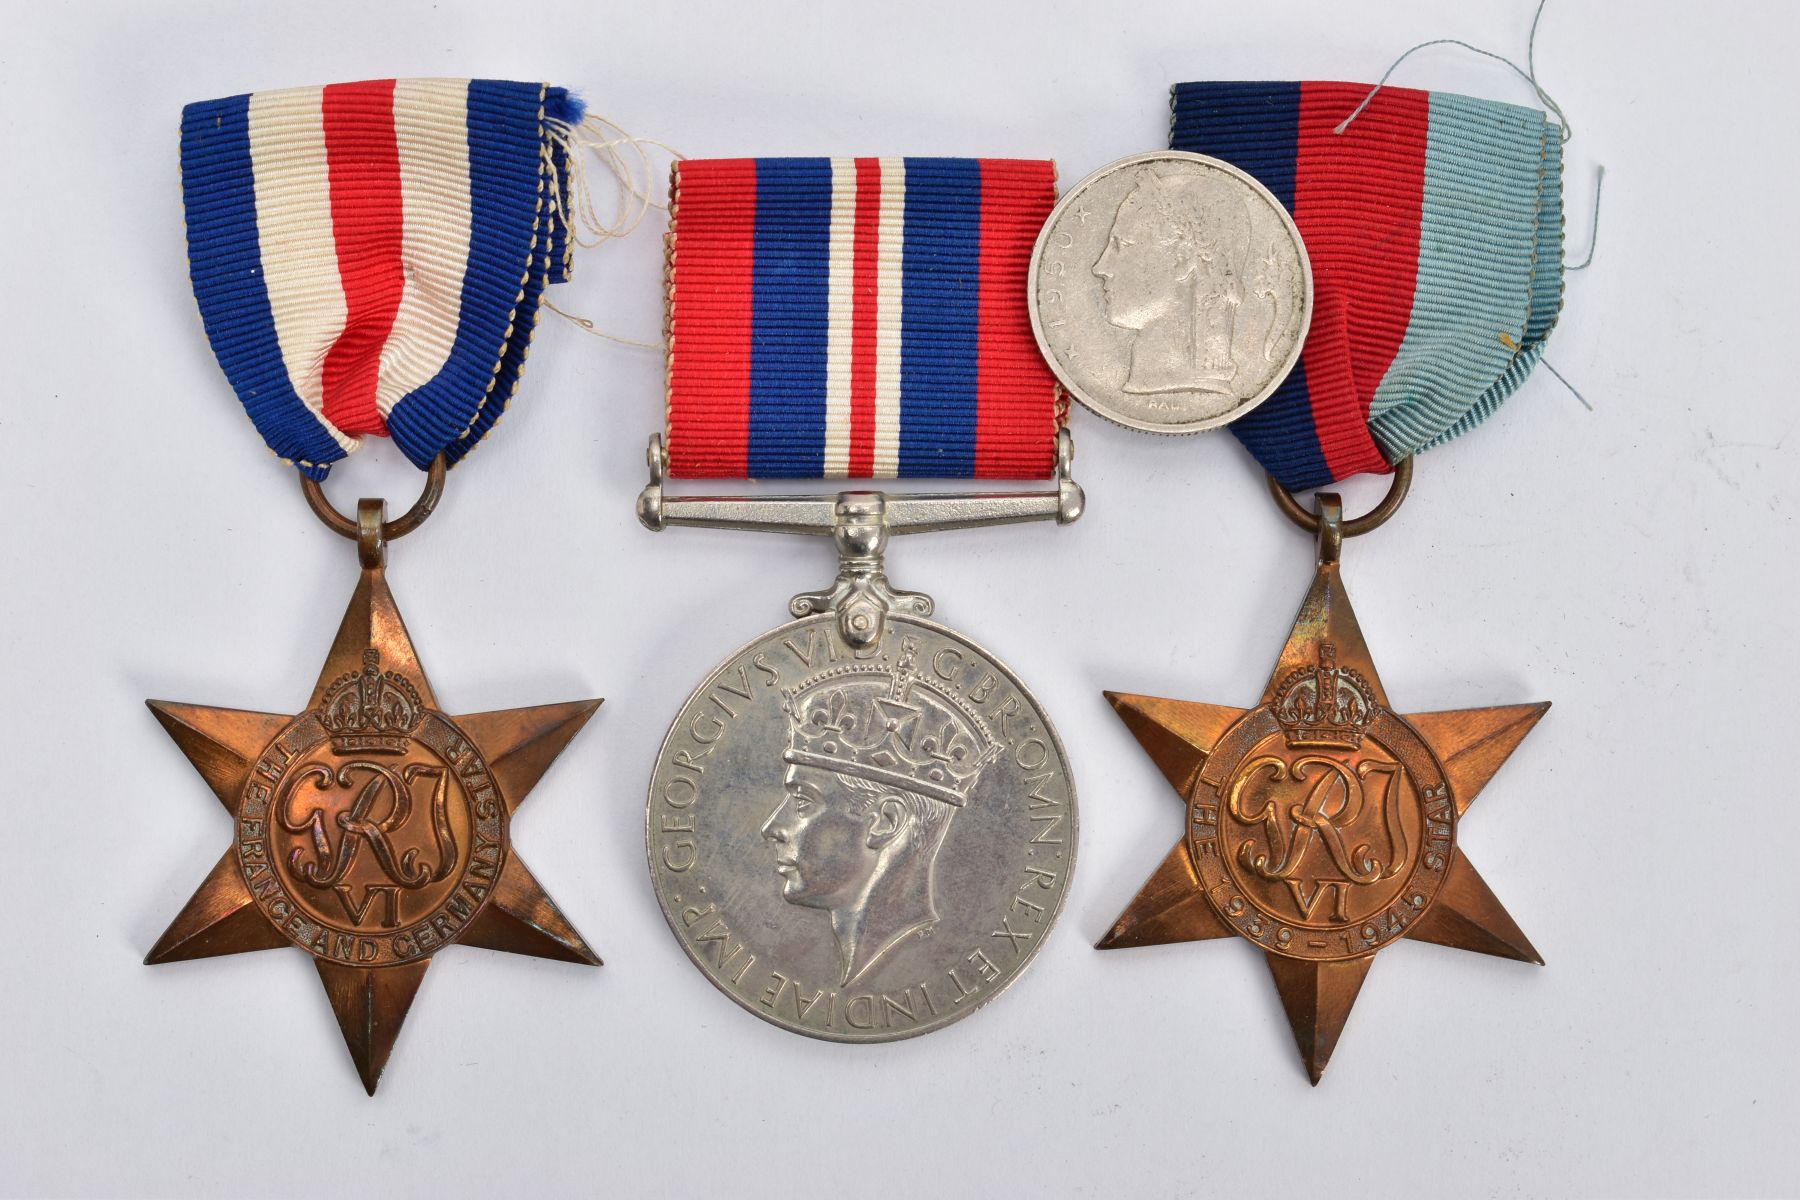 A SMALL BOX CONTAINING THREE WORLD WAR TWO MEDALS, as follows 1939-45, France & Germany Stars, & War